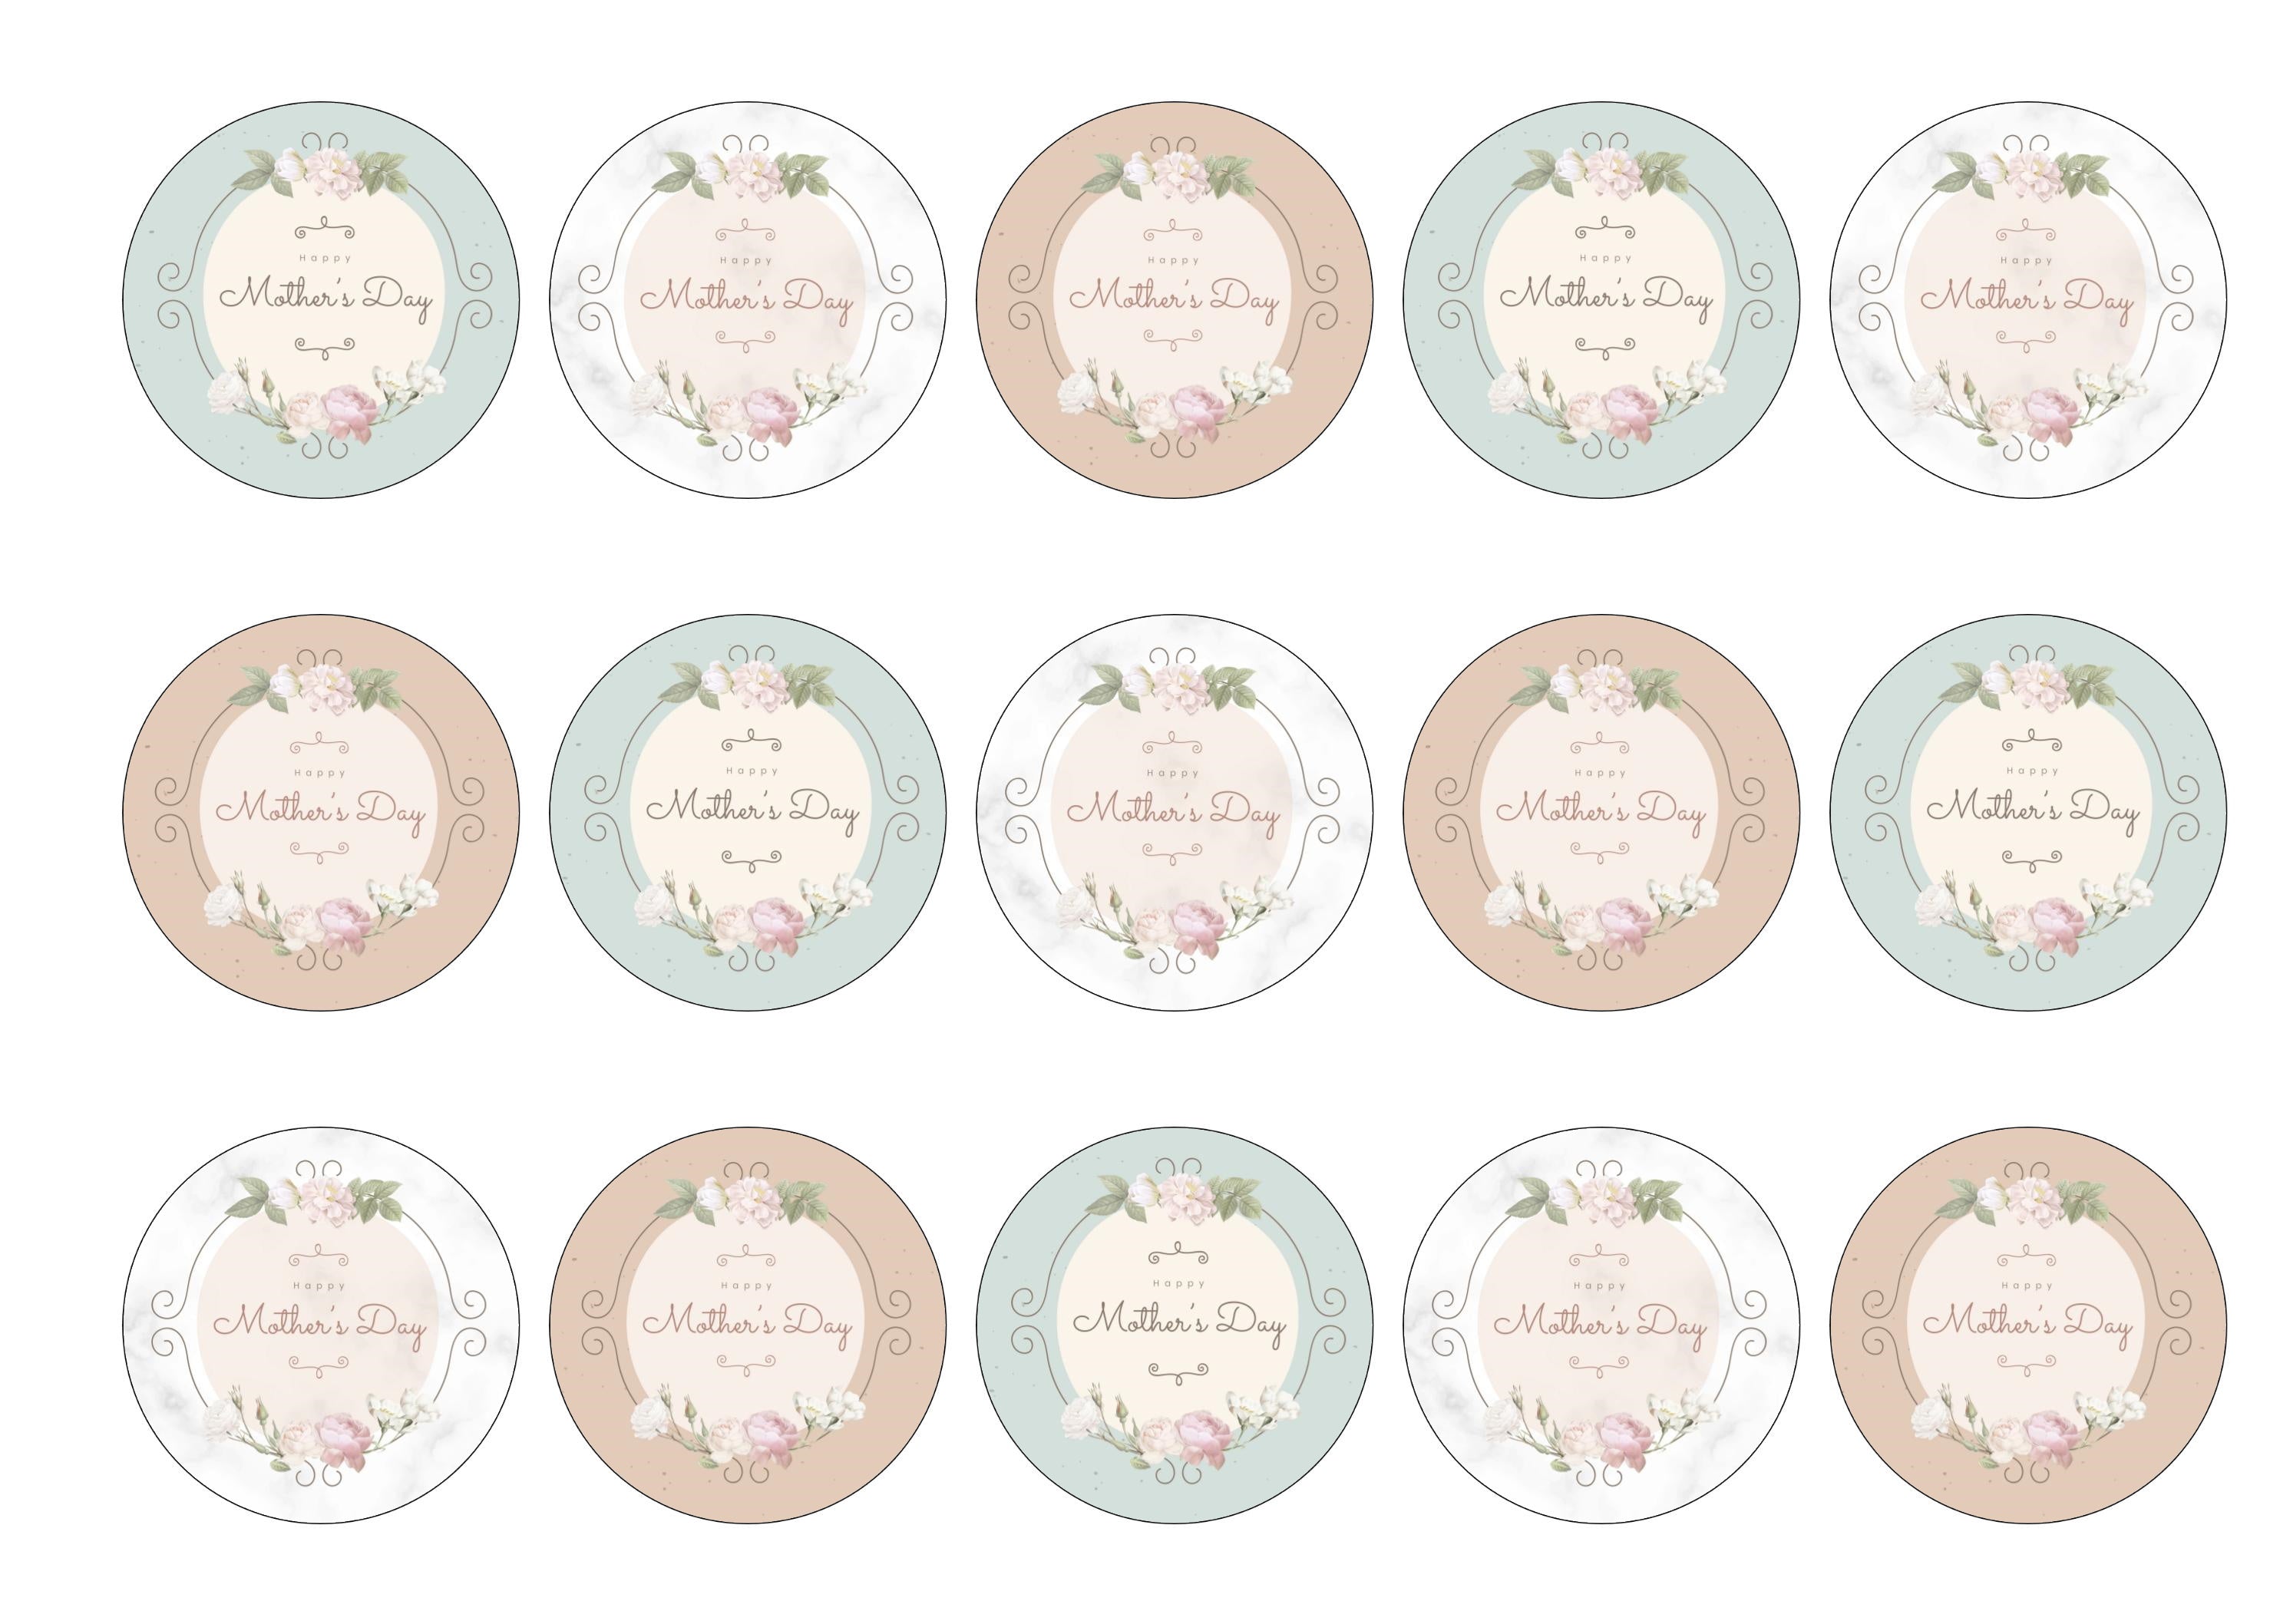 Printed cupcake toppers with a vintage theme for Mother's Day